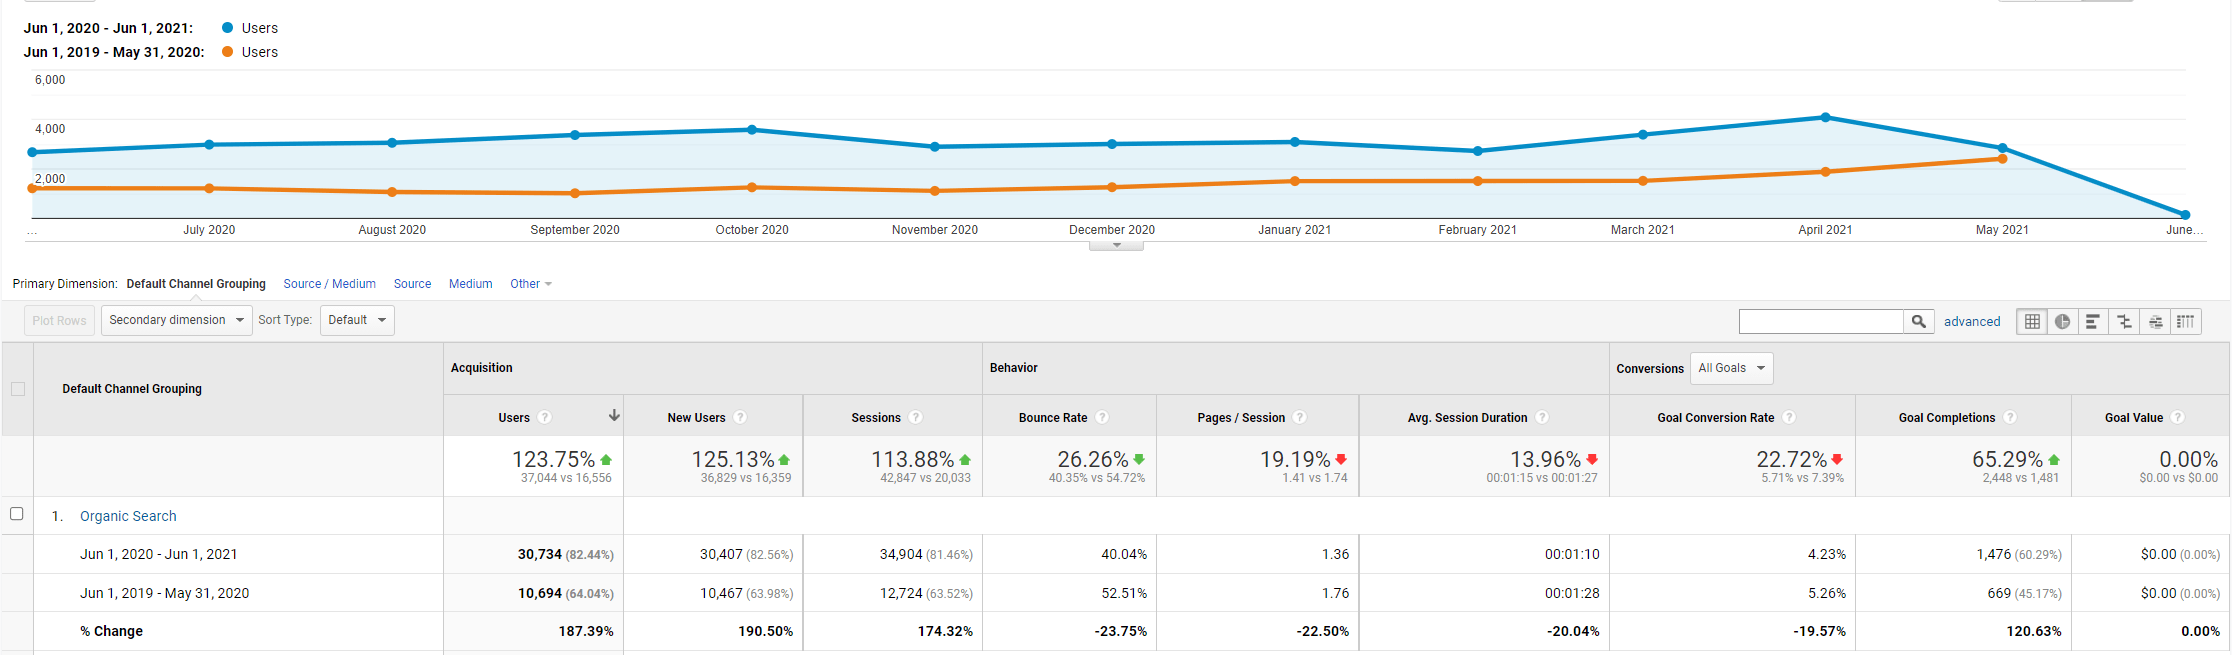 Chart showing the Analytics of Organic Search improvements from June 2019 to June 2020